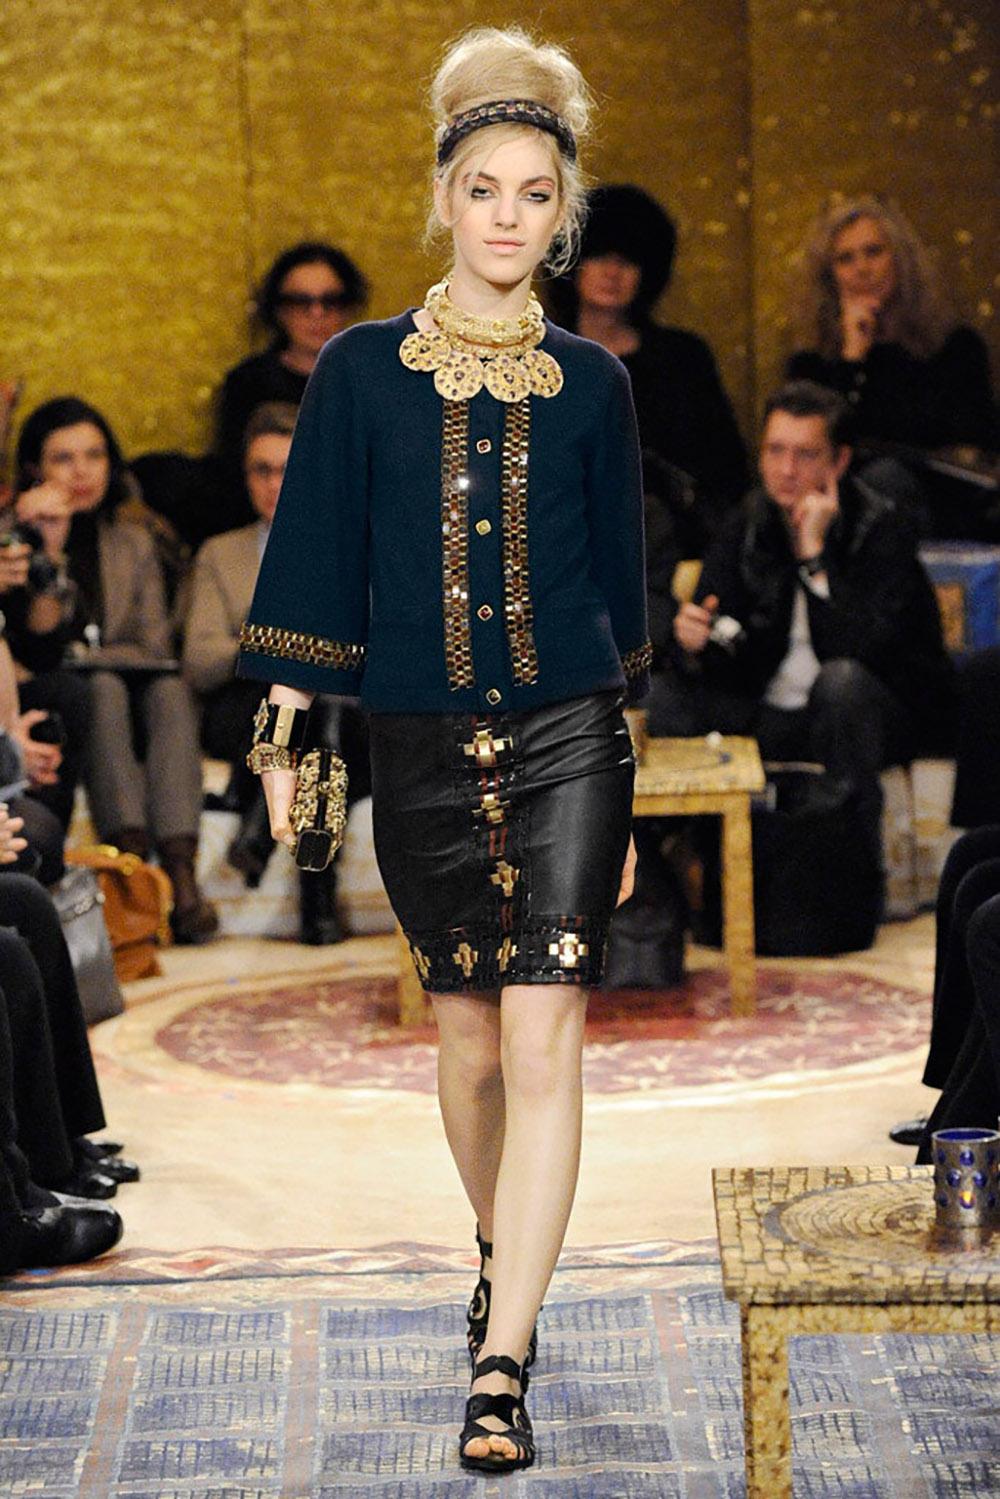 Boutique price oover 6,400$
Stunning Chanel black cashmere tunic mini dress / jumper with Jewel Gripoix mosaic and chain embellishment -- from Runway of Paris / BYZANCE Collection, metiers d'Art
- CC logo jewel buttons at neckline
Size mark 40 FR.